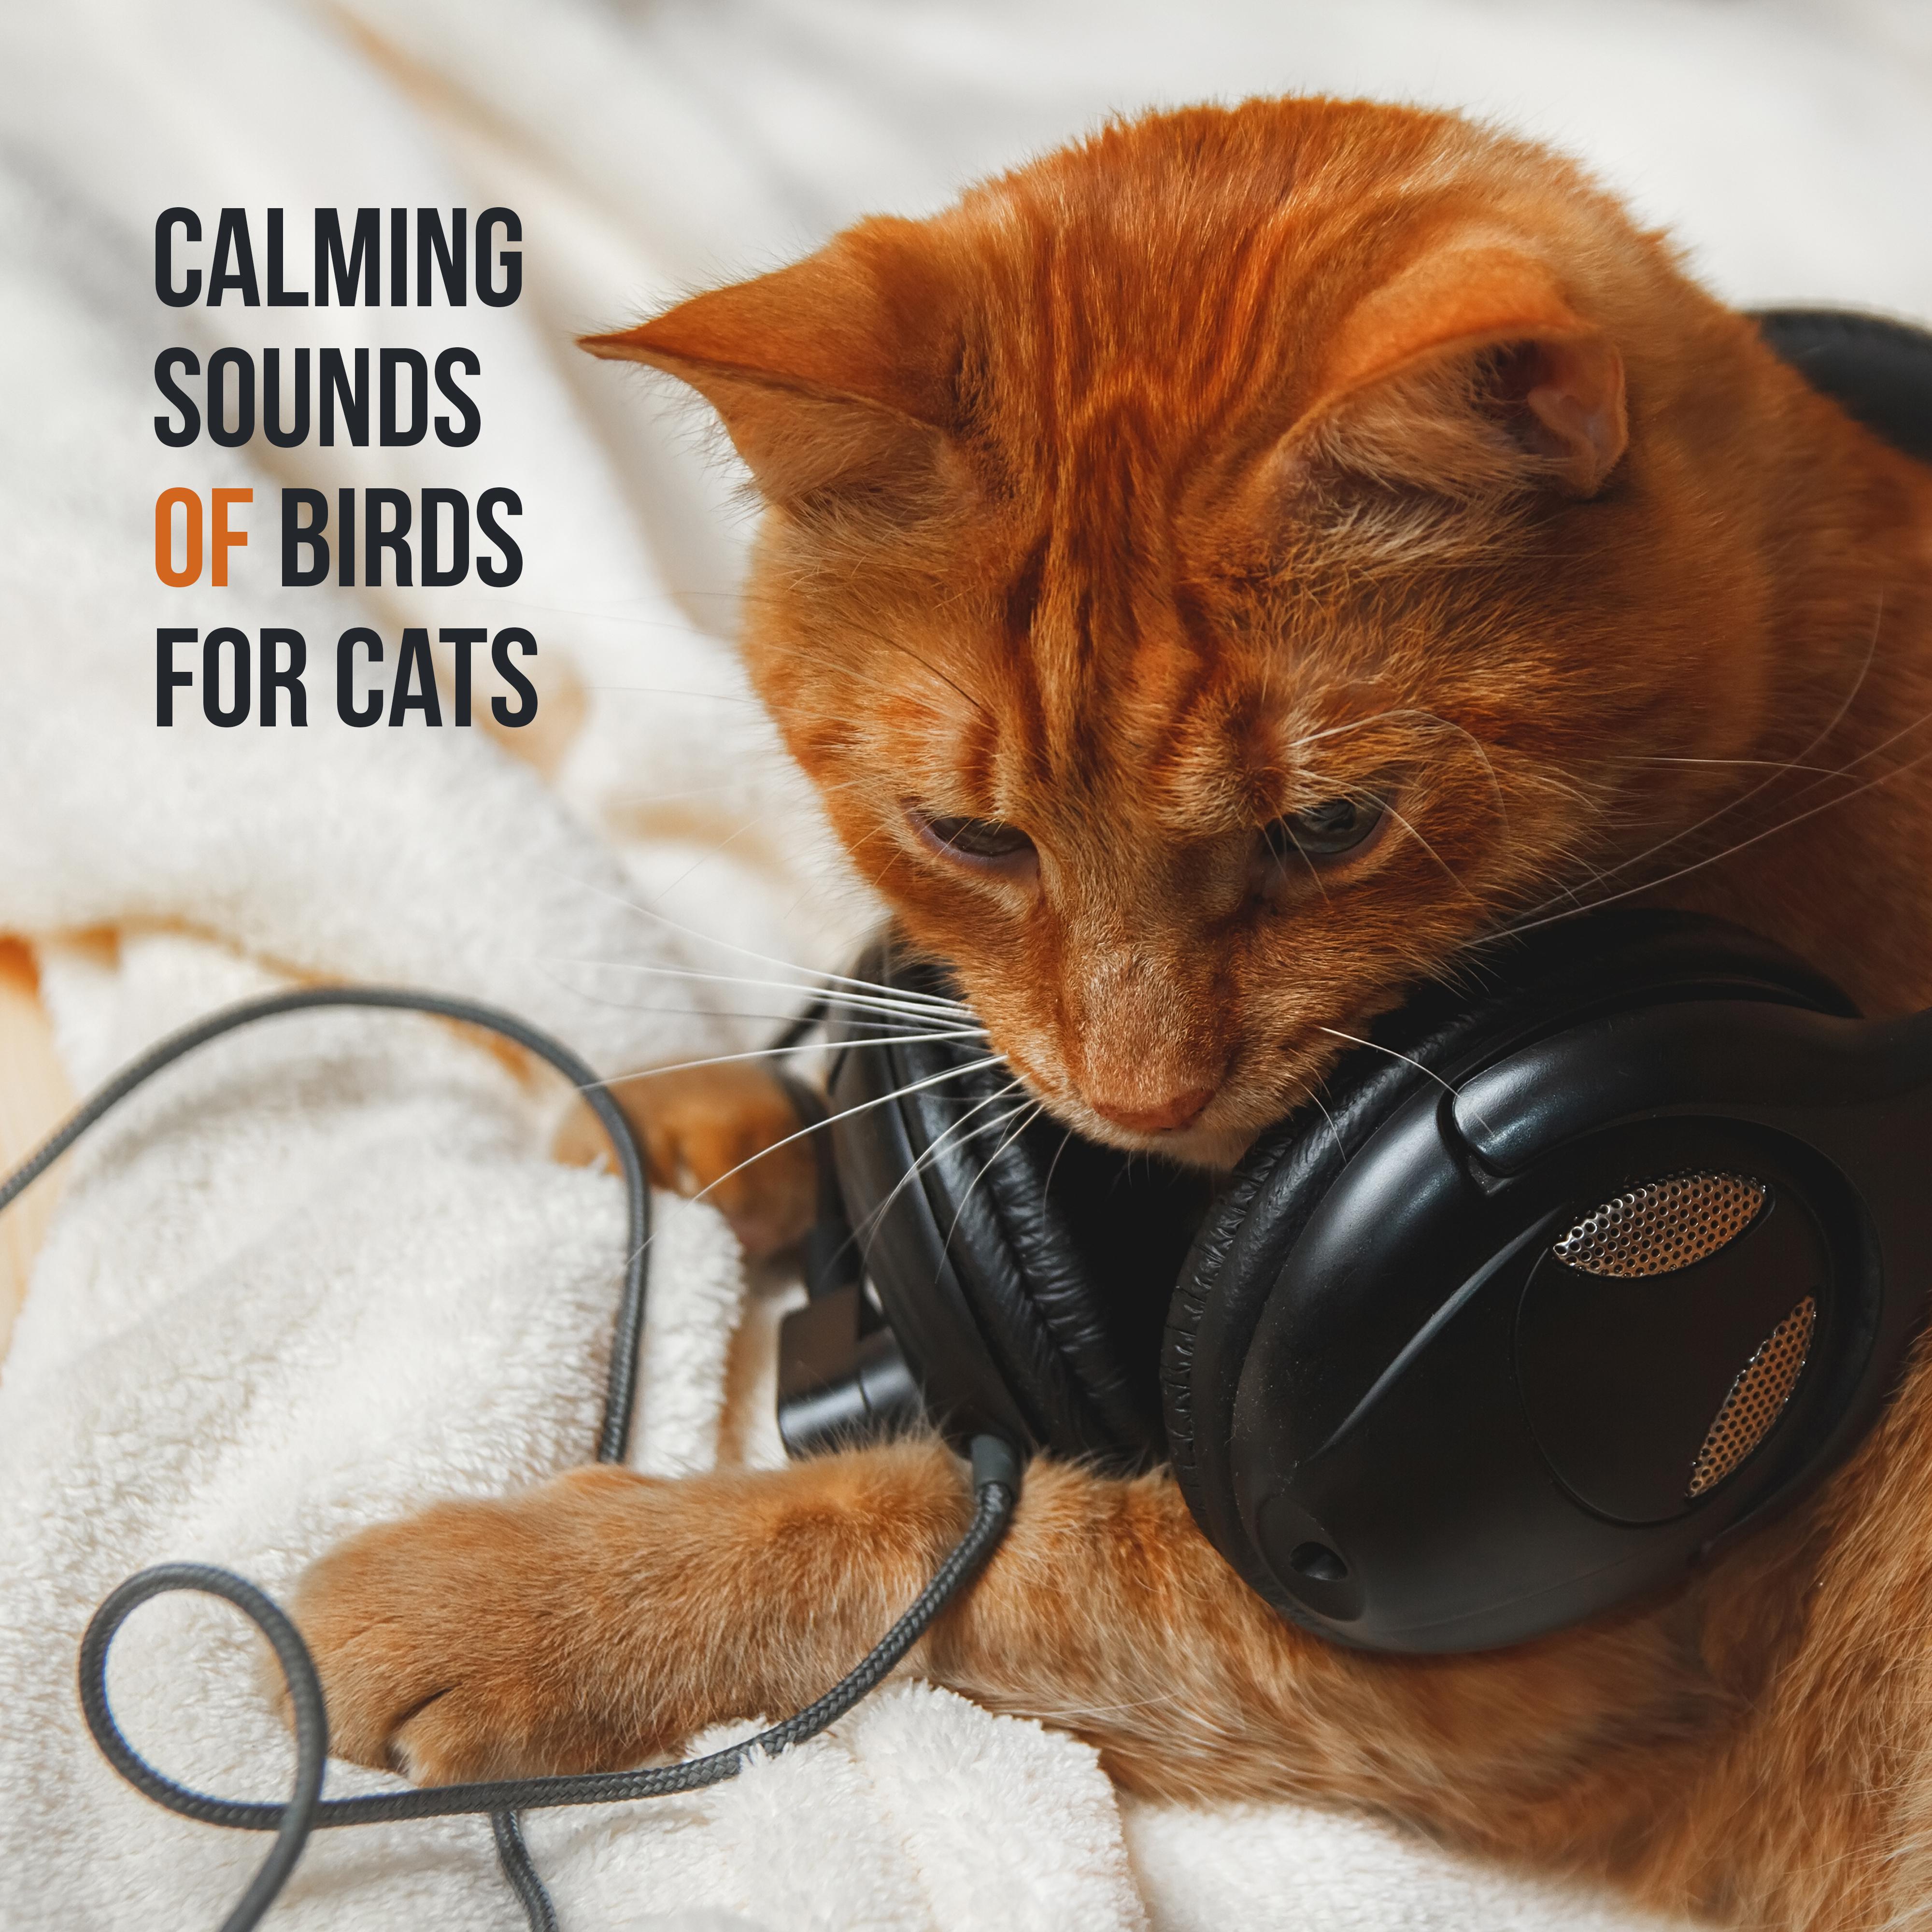 Calming Sounds of Birds for Cats  15 Relaxing Sounds for Pets, Music for Cats, Deep Harmony, Nature Sounds, Relax  Sleep, Calm Down